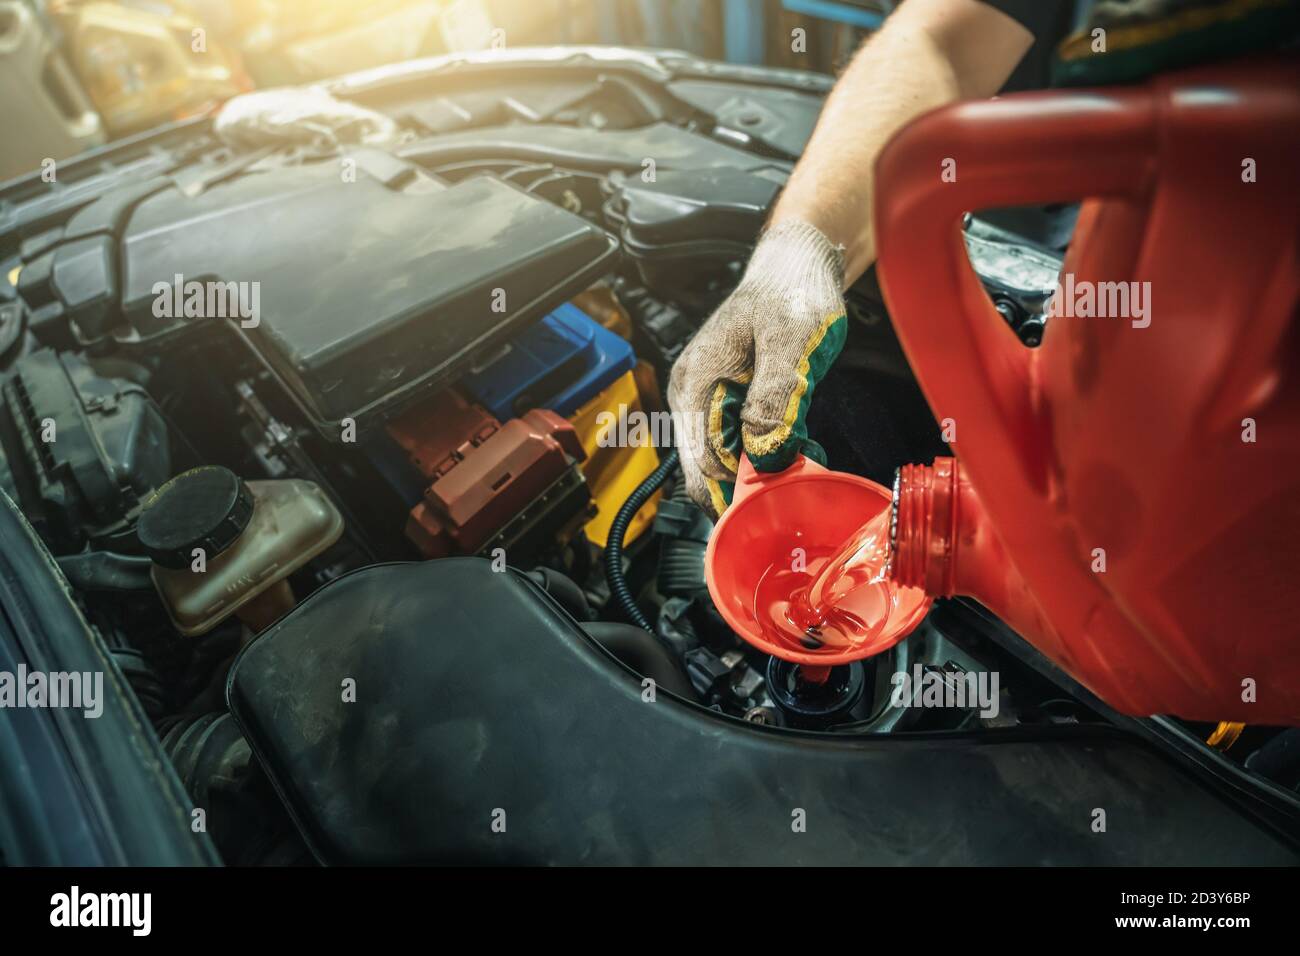 New engine oil pours from canister into motor at car service, close up. Stock Photo